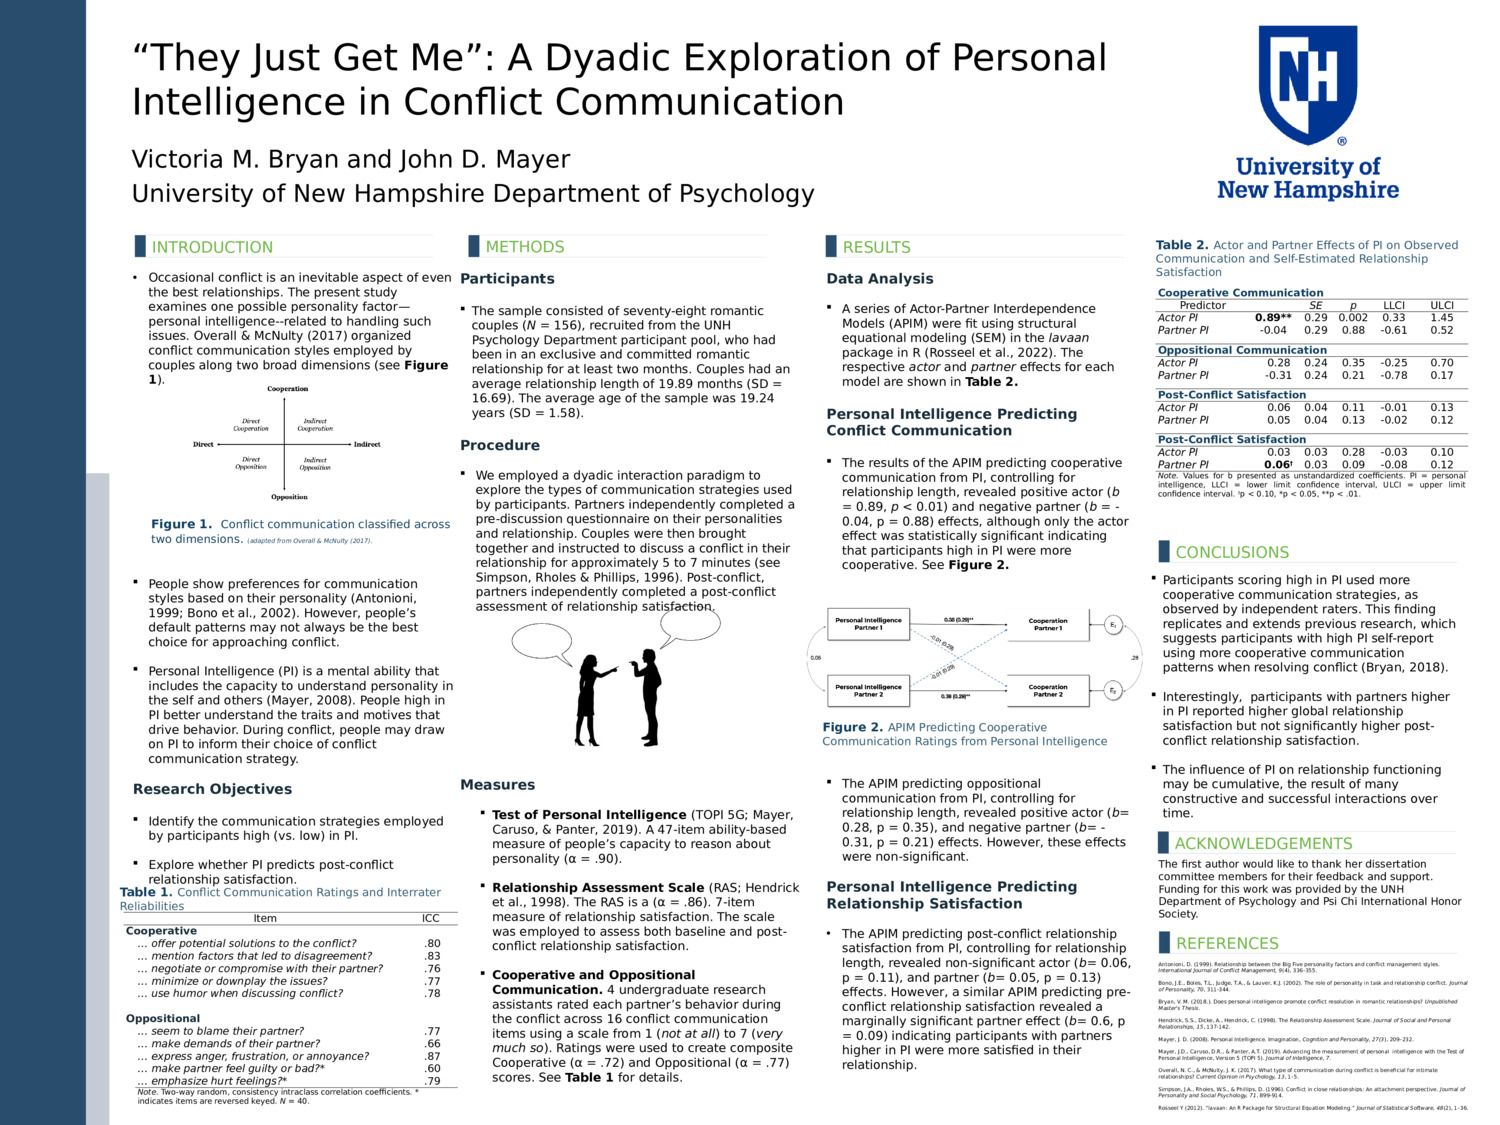 “They Just Get Me”: A Dyadic Exploration Of Personal Intelligence In Conflict Communication by vmb1007